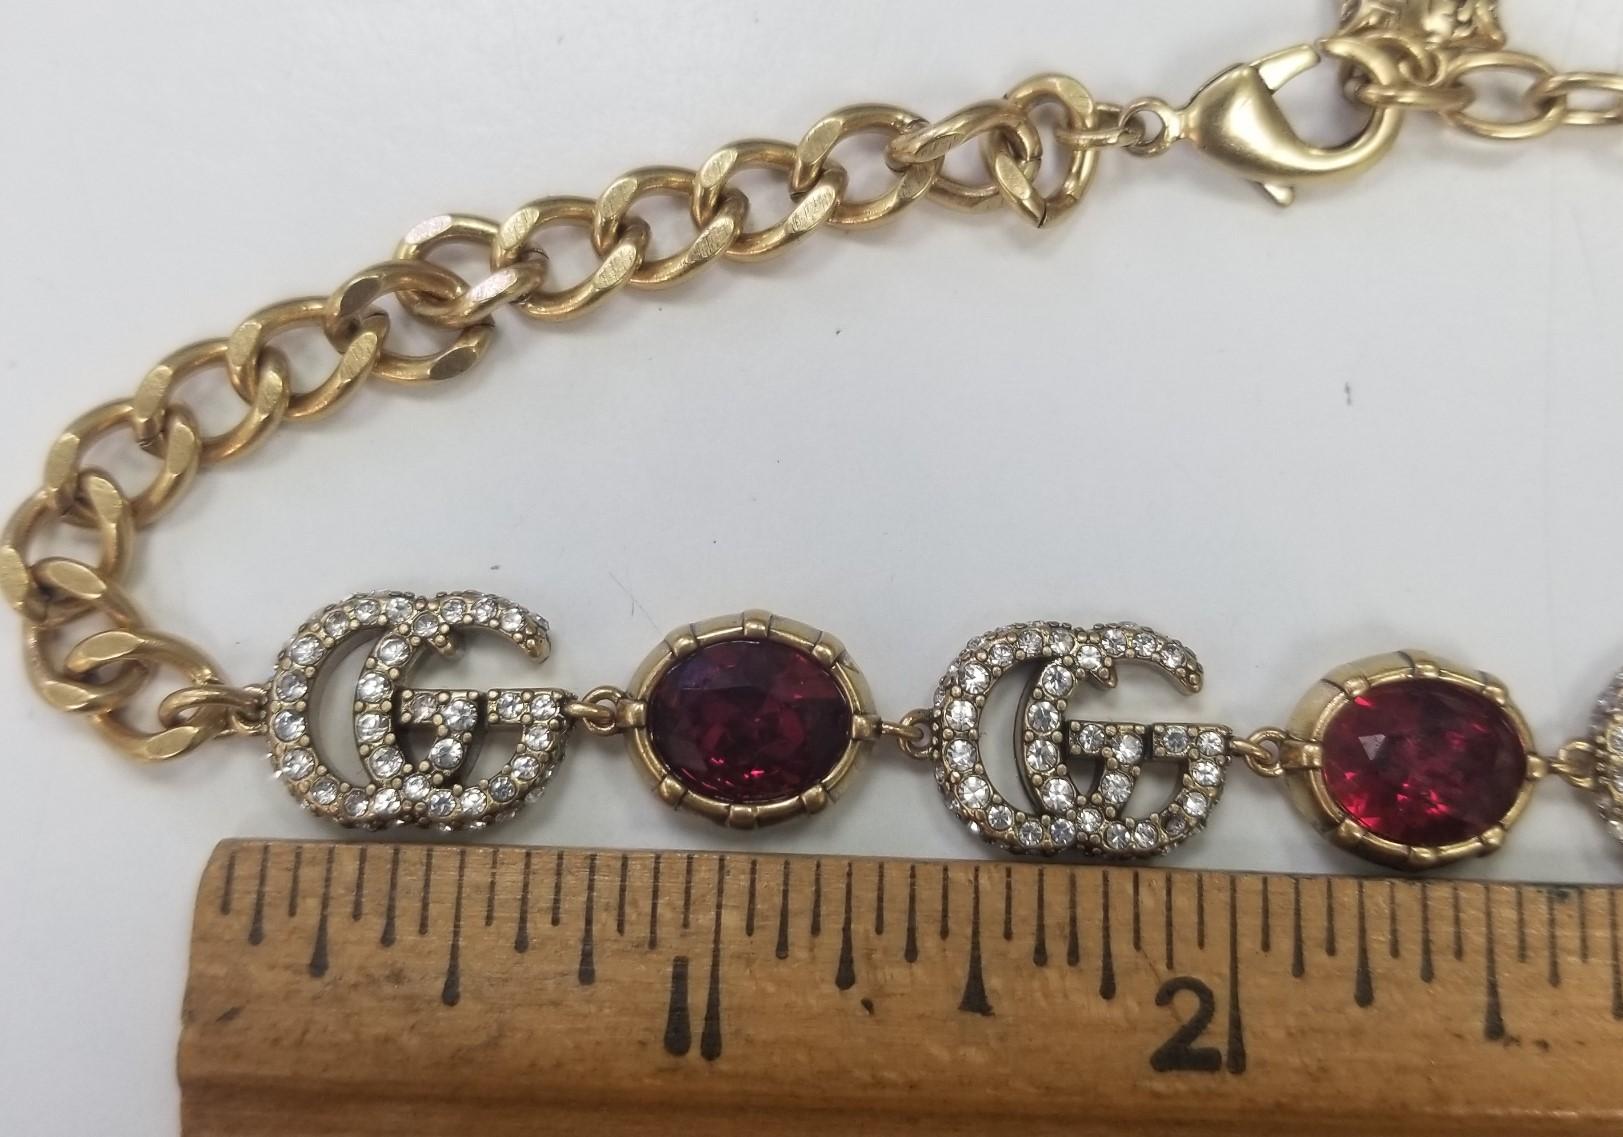  A red faceted crystal pendant combines with the crystal Double G detail, forming a sparkling pendant that completes these earrings in aged gold-toned metal 16 inches.

    Metal with aged gold finish
    Crystal encrusted Double G detail
    Red